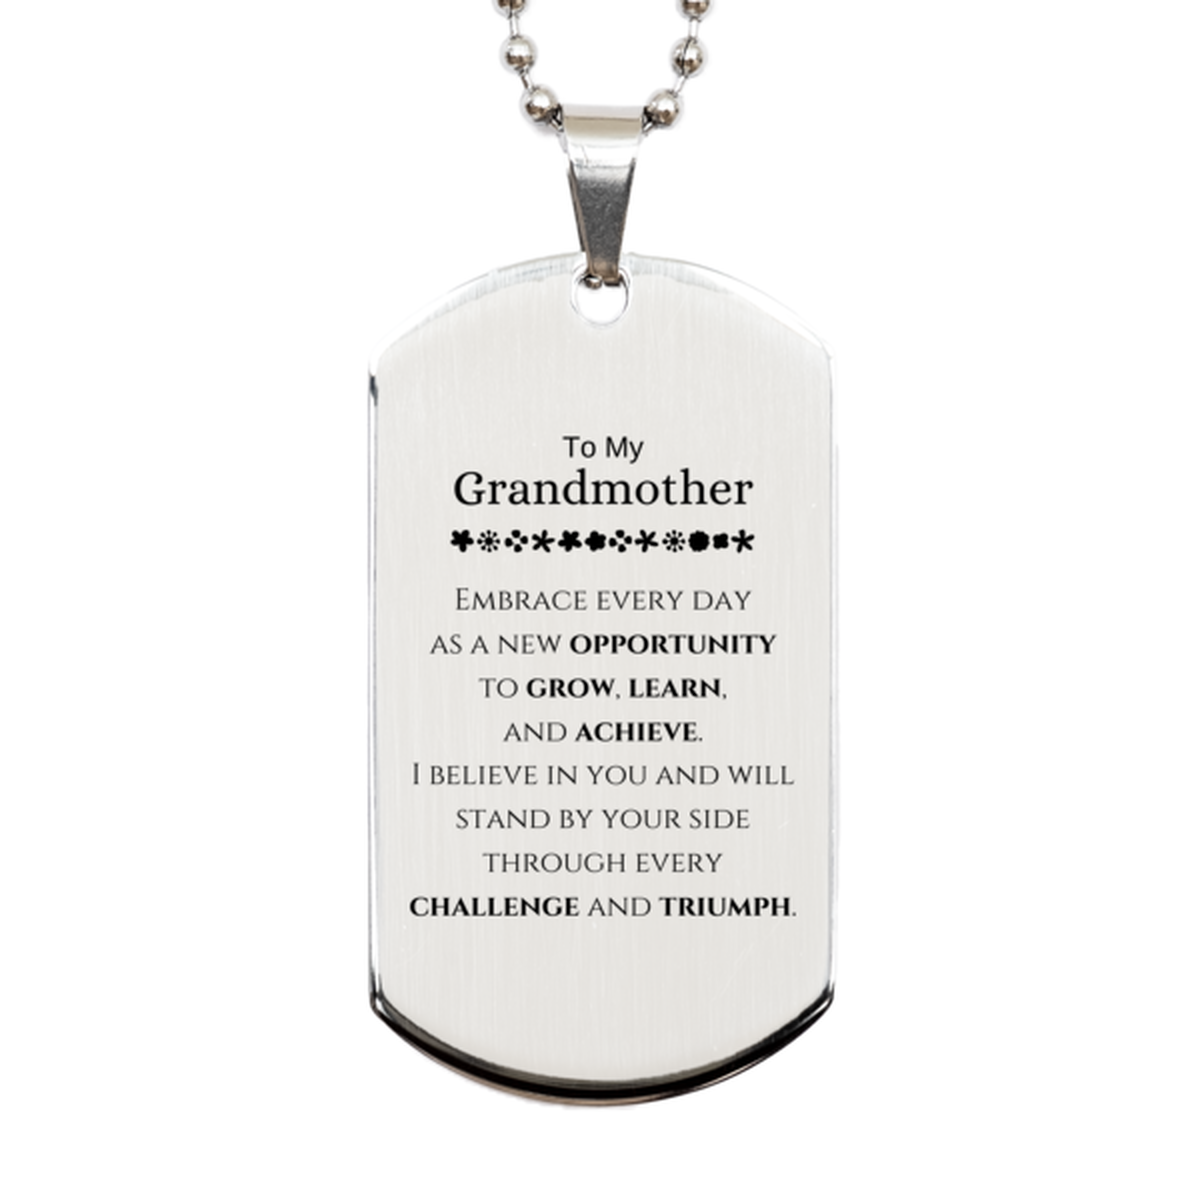 To My Grandmother Gifts, I believe in you and will stand by your side, Inspirational Silver Dog Tag For Grandmother, Birthday Christmas Motivational Grandmother Gifts